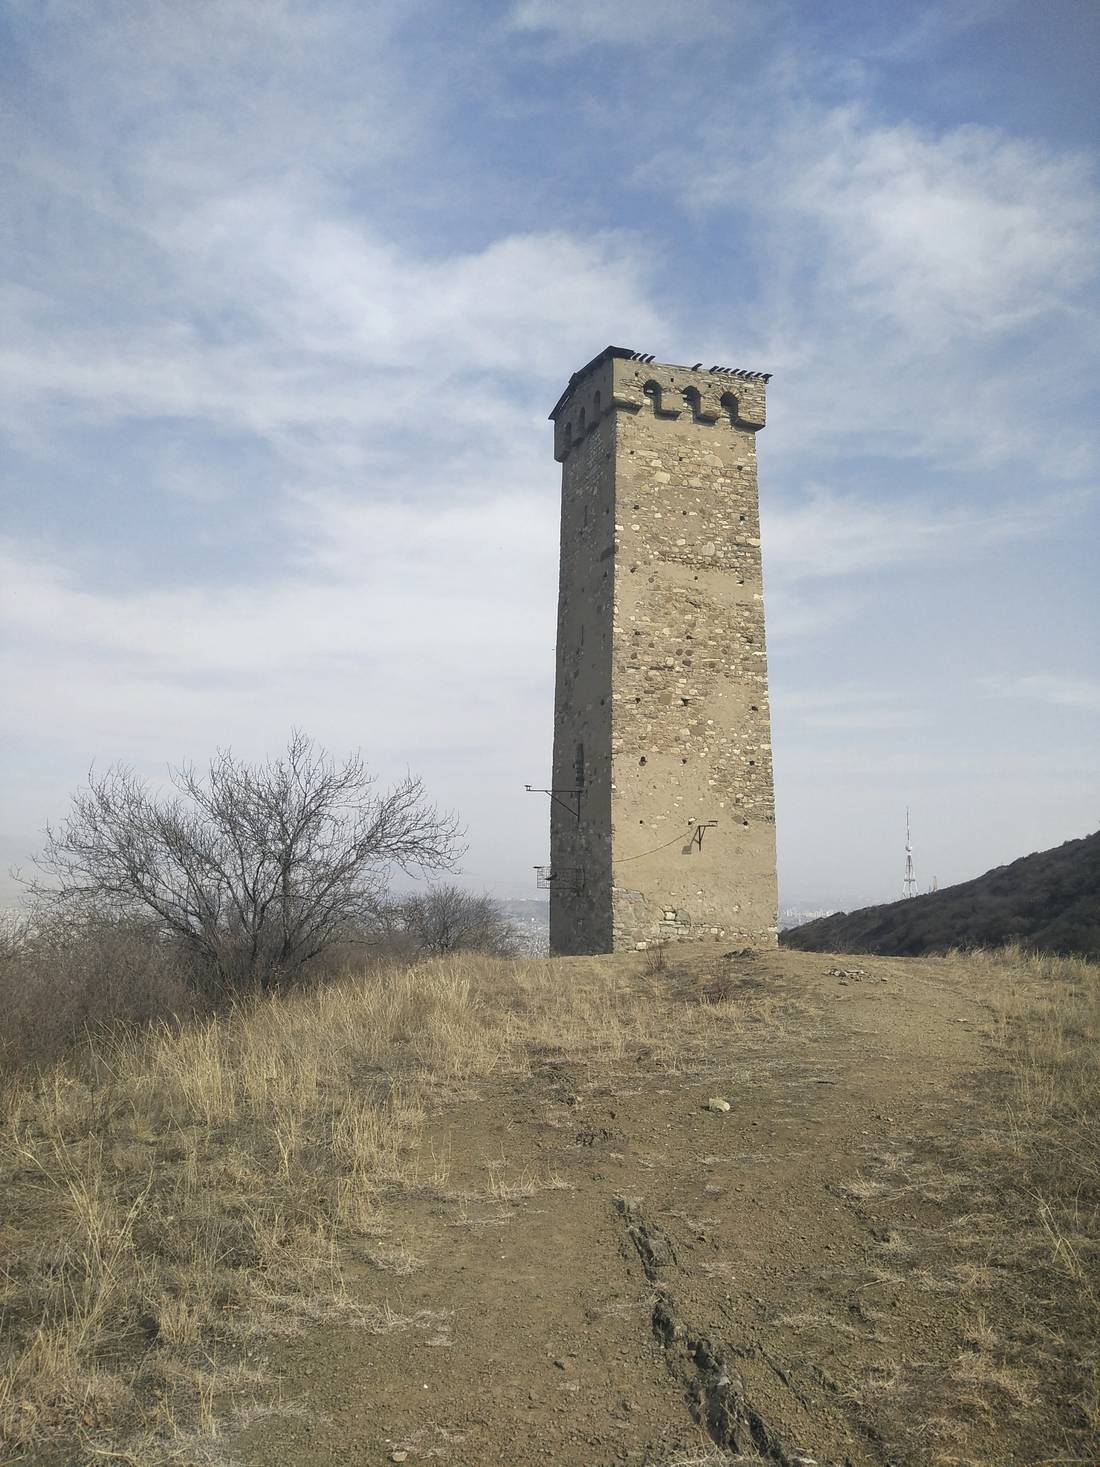 Svaneti tower in Tbilisi was probably the furthest place to go after all the public transportation have been cancelled.